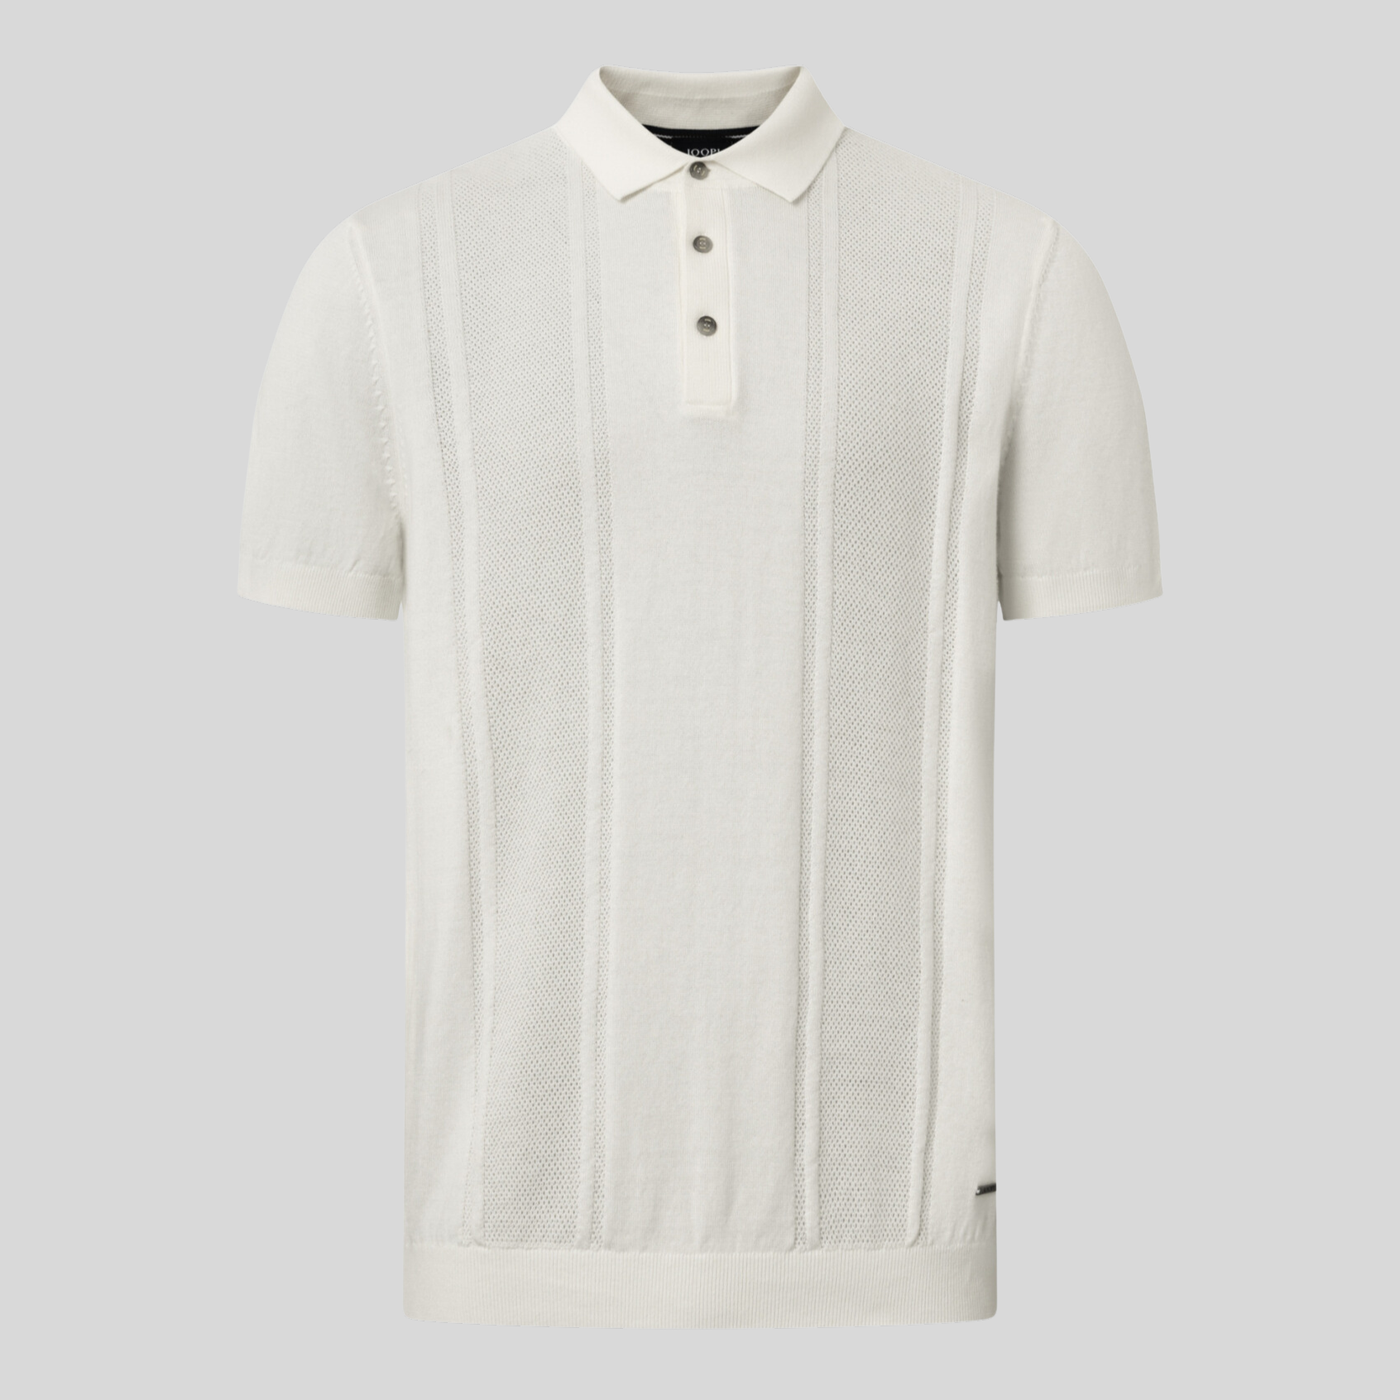 Gotstyle Fashion - Joop! Polos Textured Mesh Panels Knit Polo - Off-White